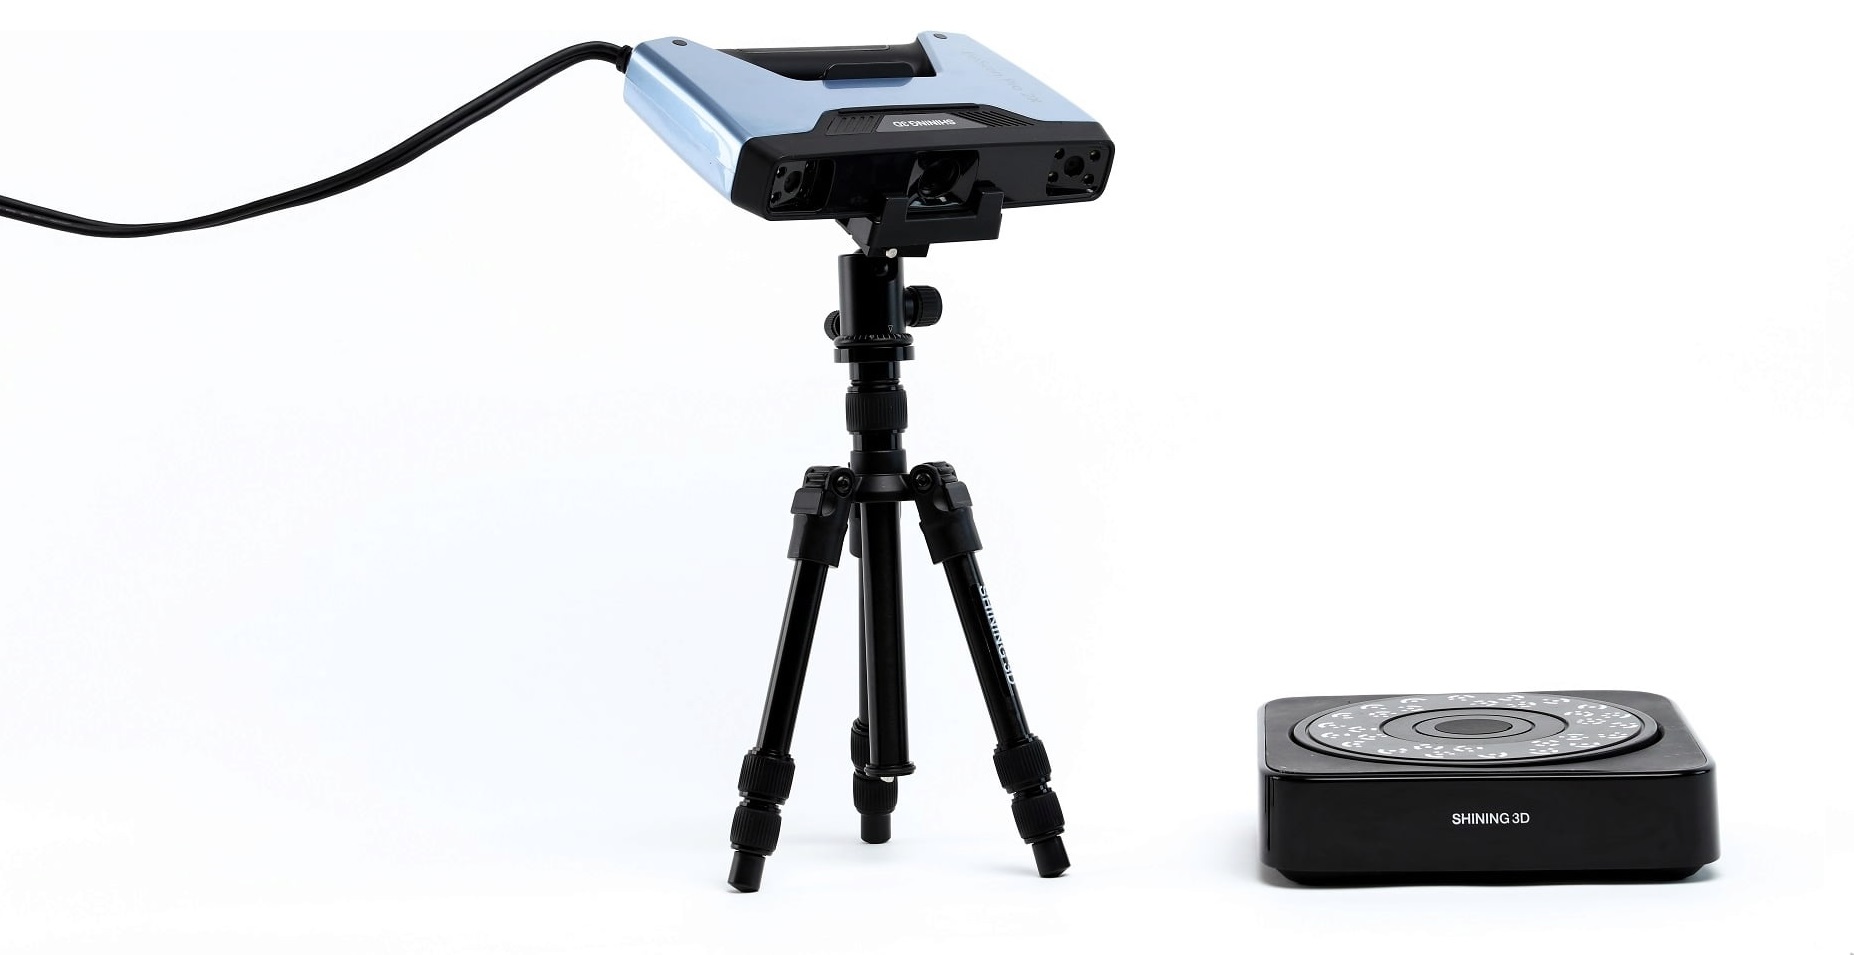 Einscan Pro Hd 3d Scanner The Industrial 3d Scanning Specialists